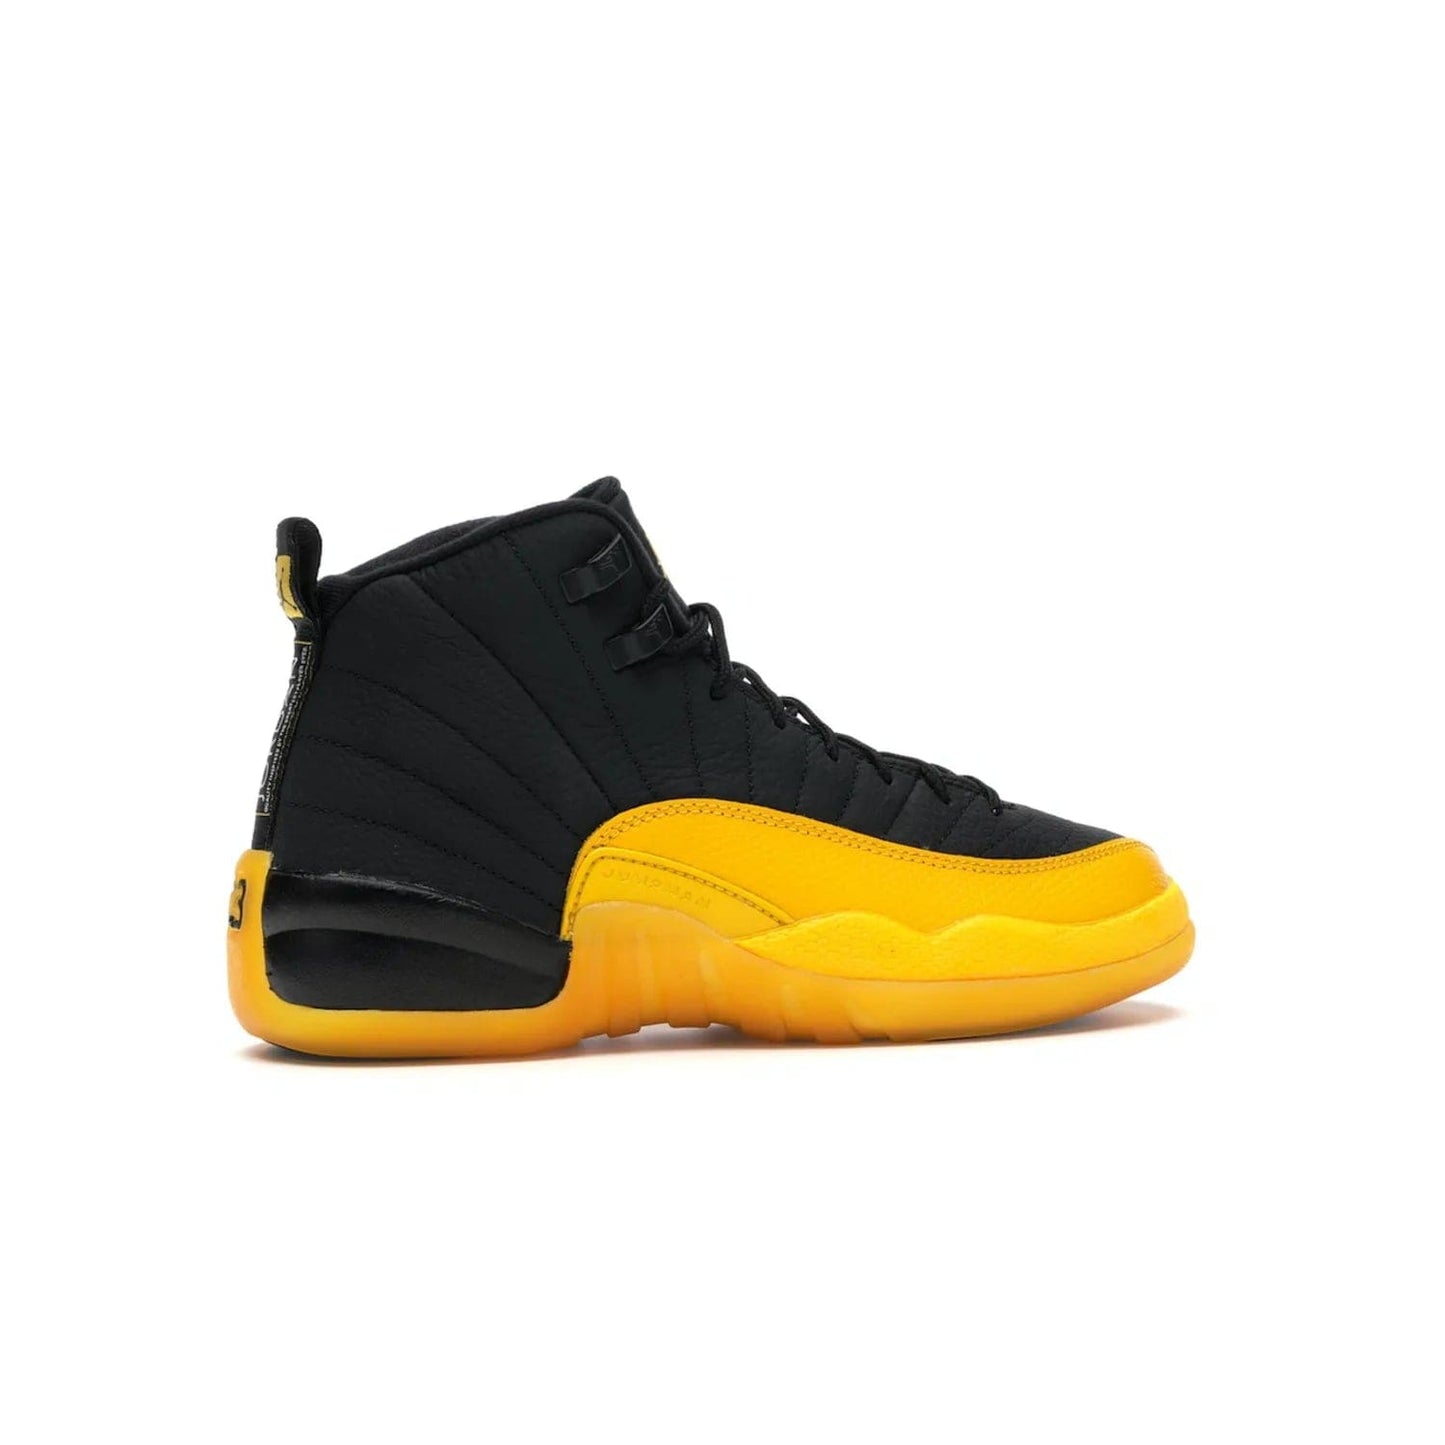 Jordan 12 Retro Black University Gold (GS) - Image 35 - Only at www.BallersClubKickz.com - Upgrade your kid's shoe collection with the Jordan 12 Retro Black University Gold. With classic style, black tumbled leather upper, and University Gold accents, it's a great summer look. Out July 2020.